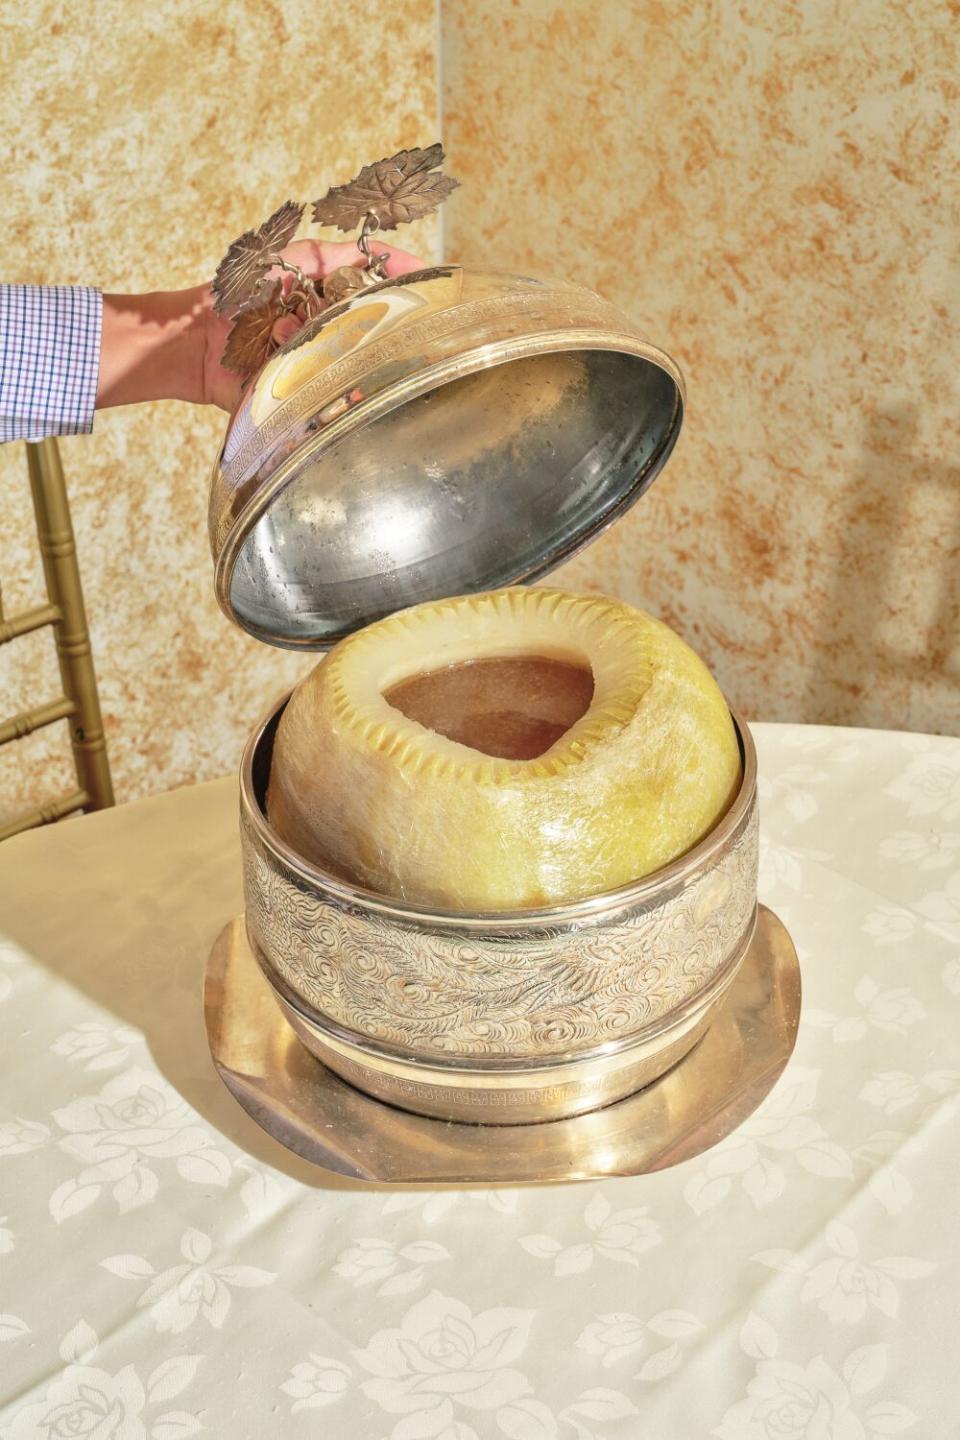 A hand lifts the lid of a round metal serving tureen containing a winter melon filled with soup